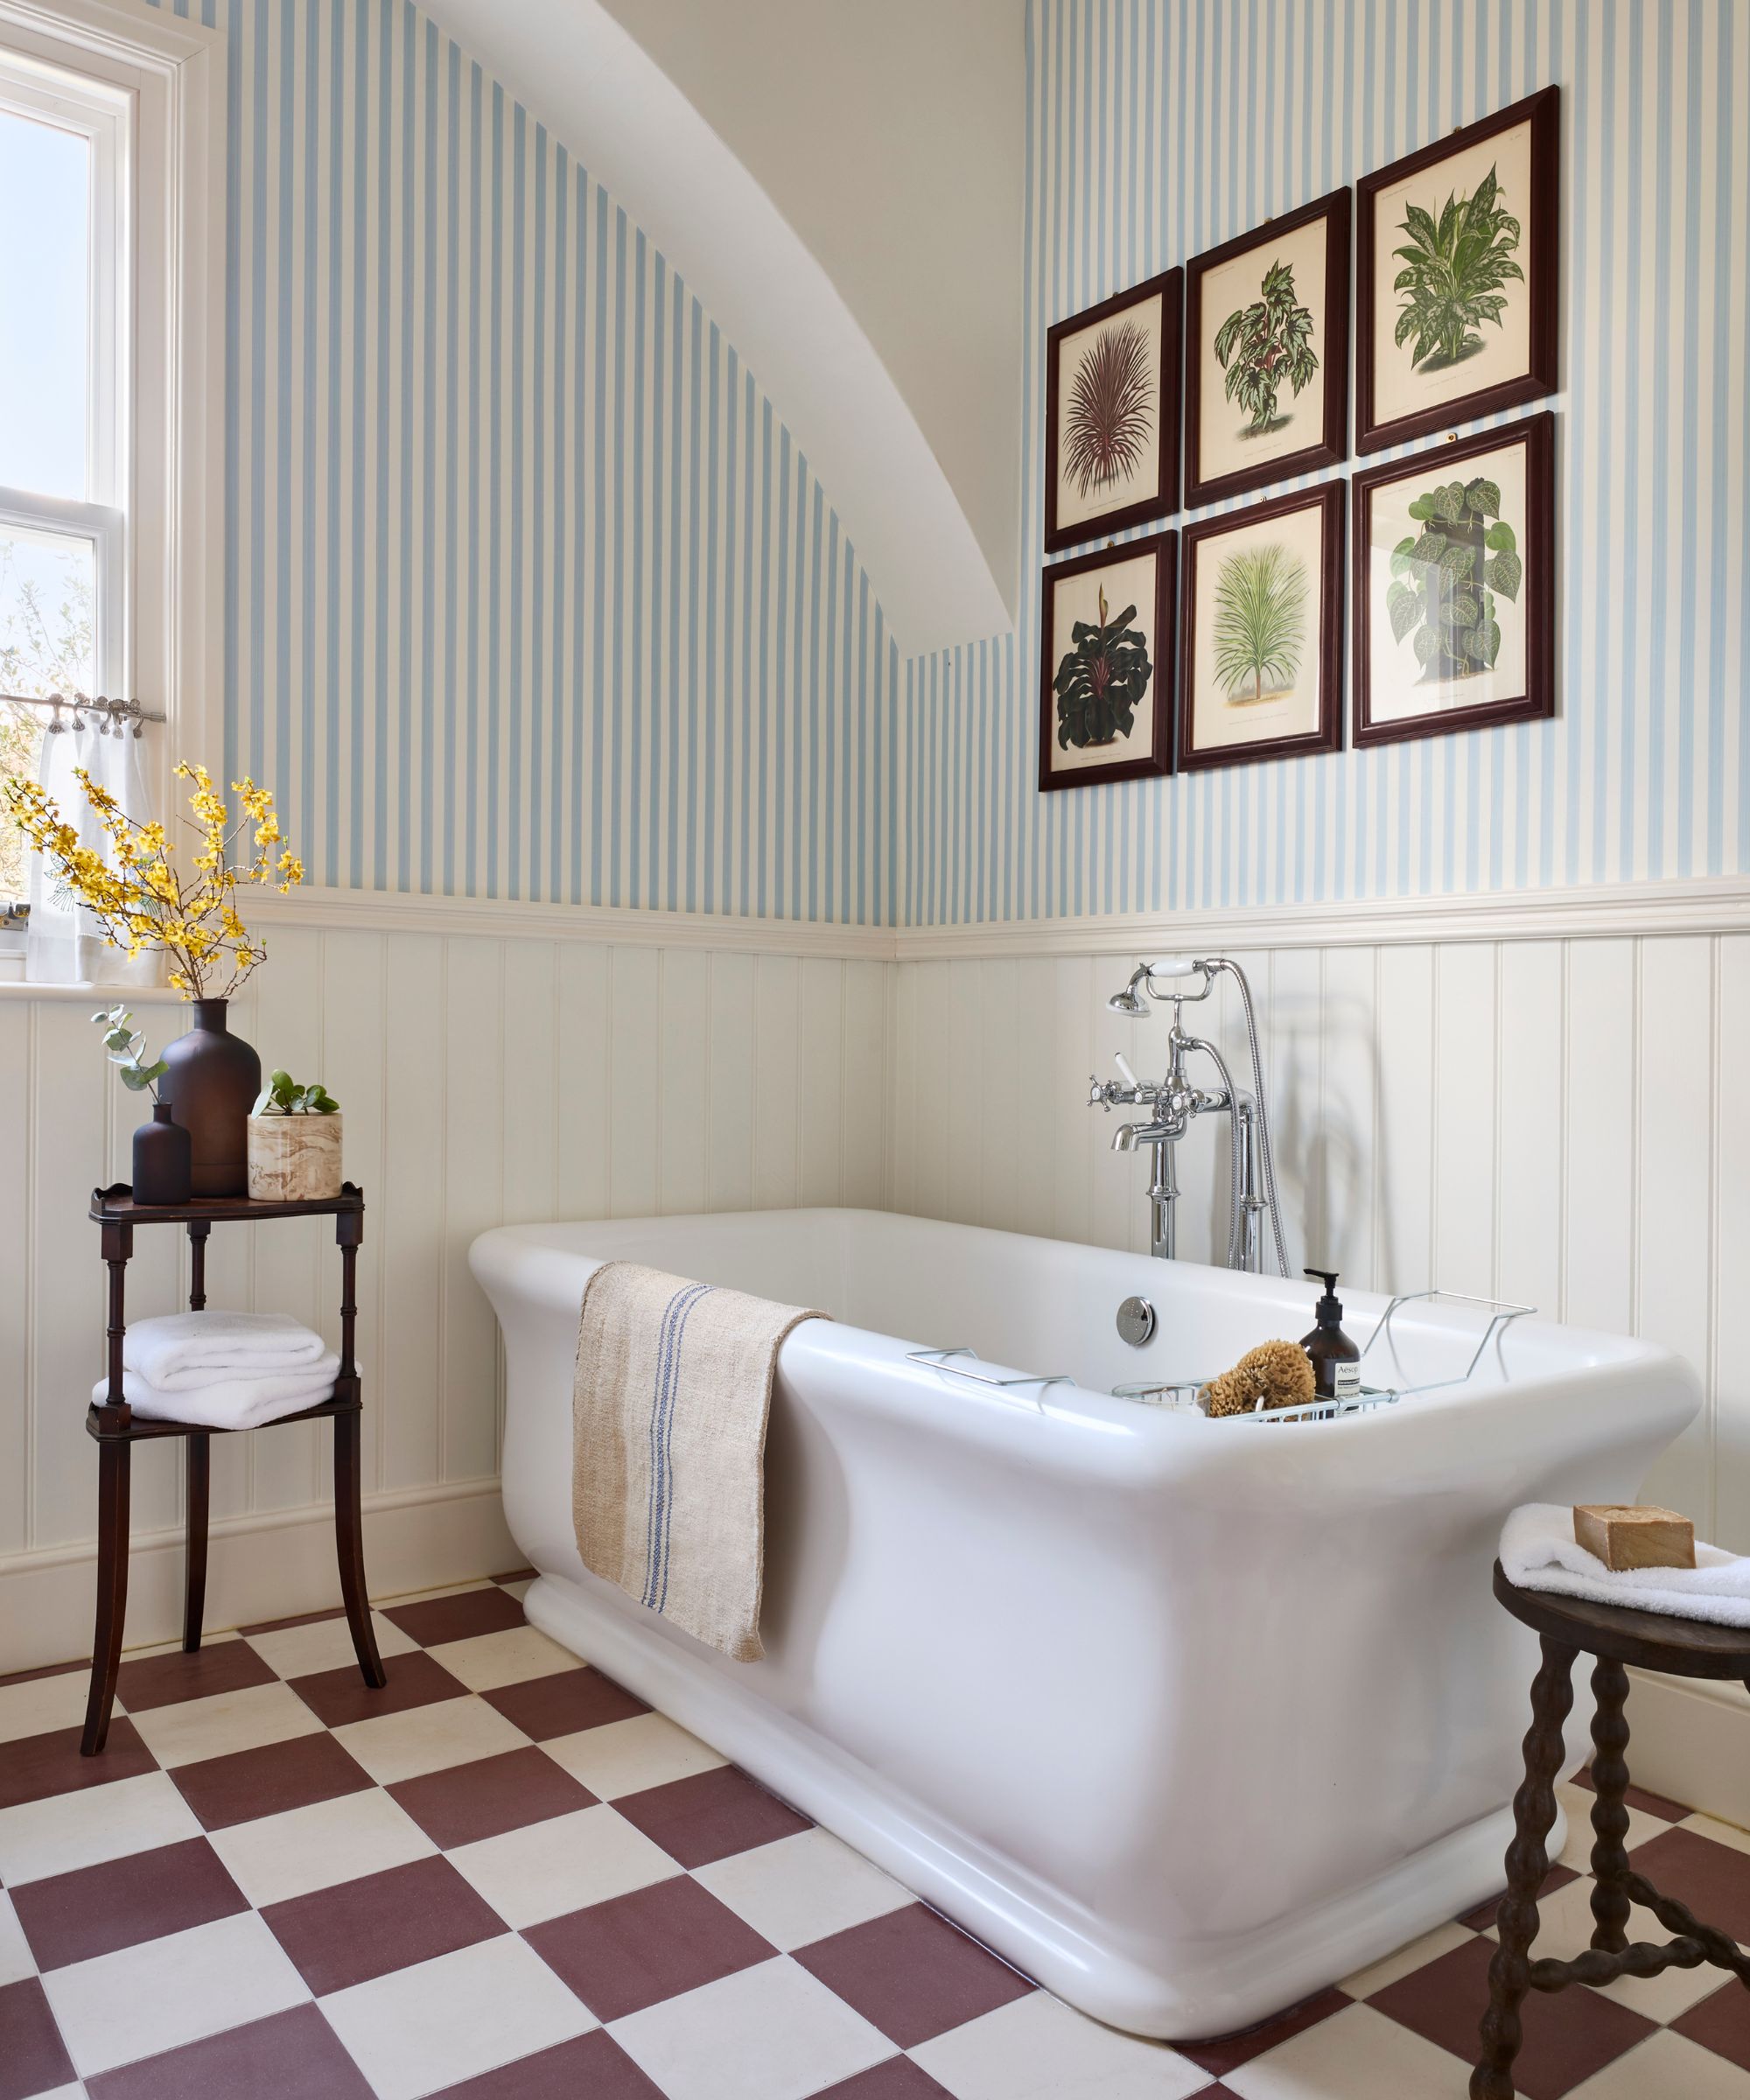 blue stripe wallpaper in a traditional bathroom with checkerboard floor tiles and freestanding tub